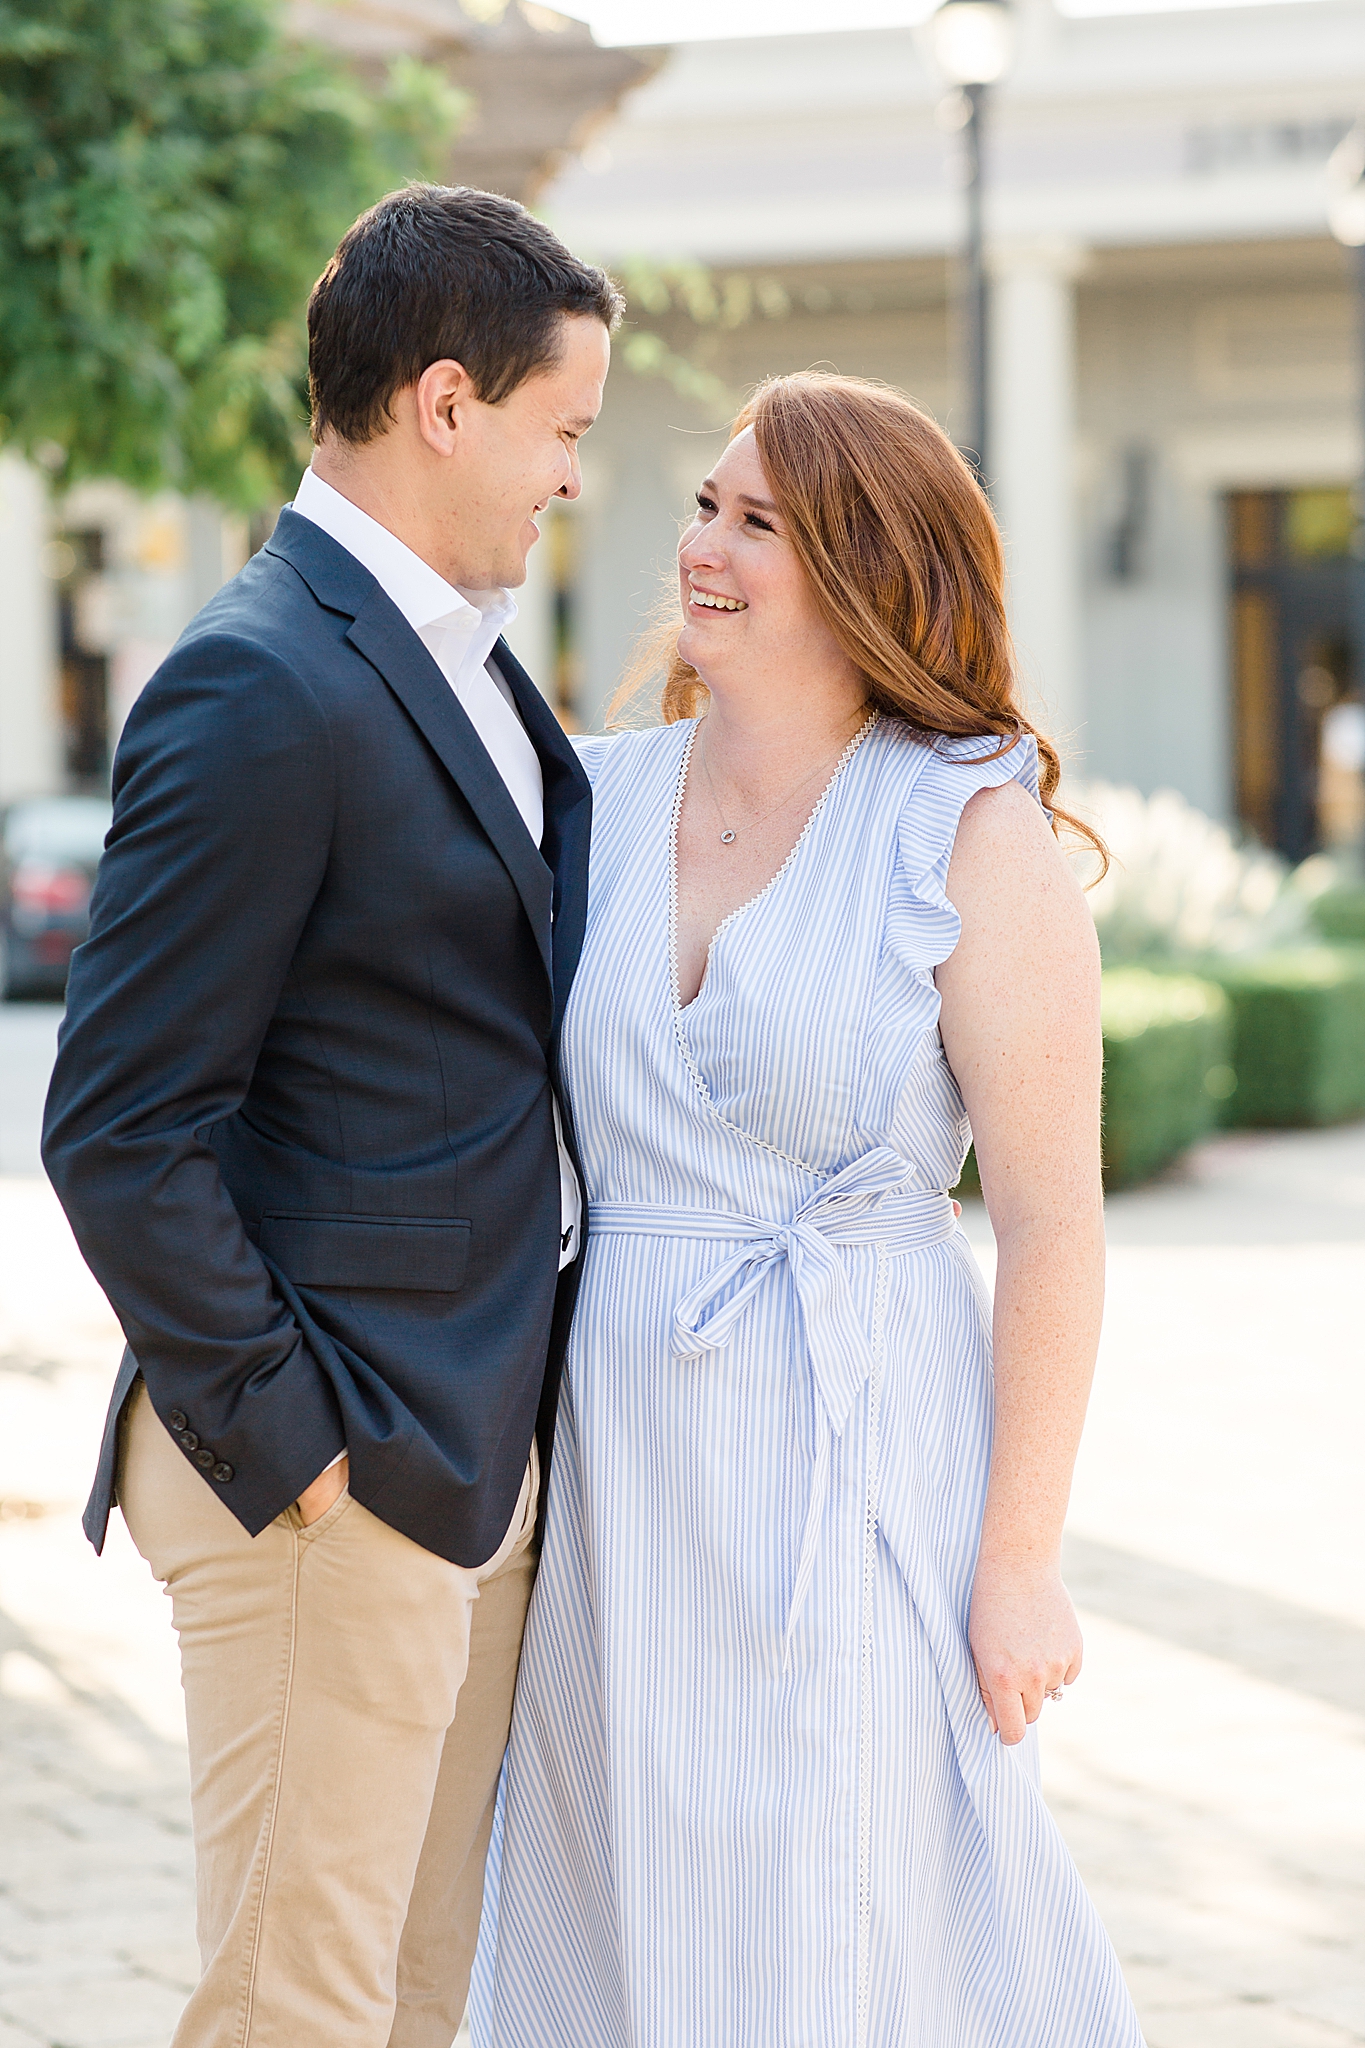 Southlake Town Square engagement session with couple in blue outfits